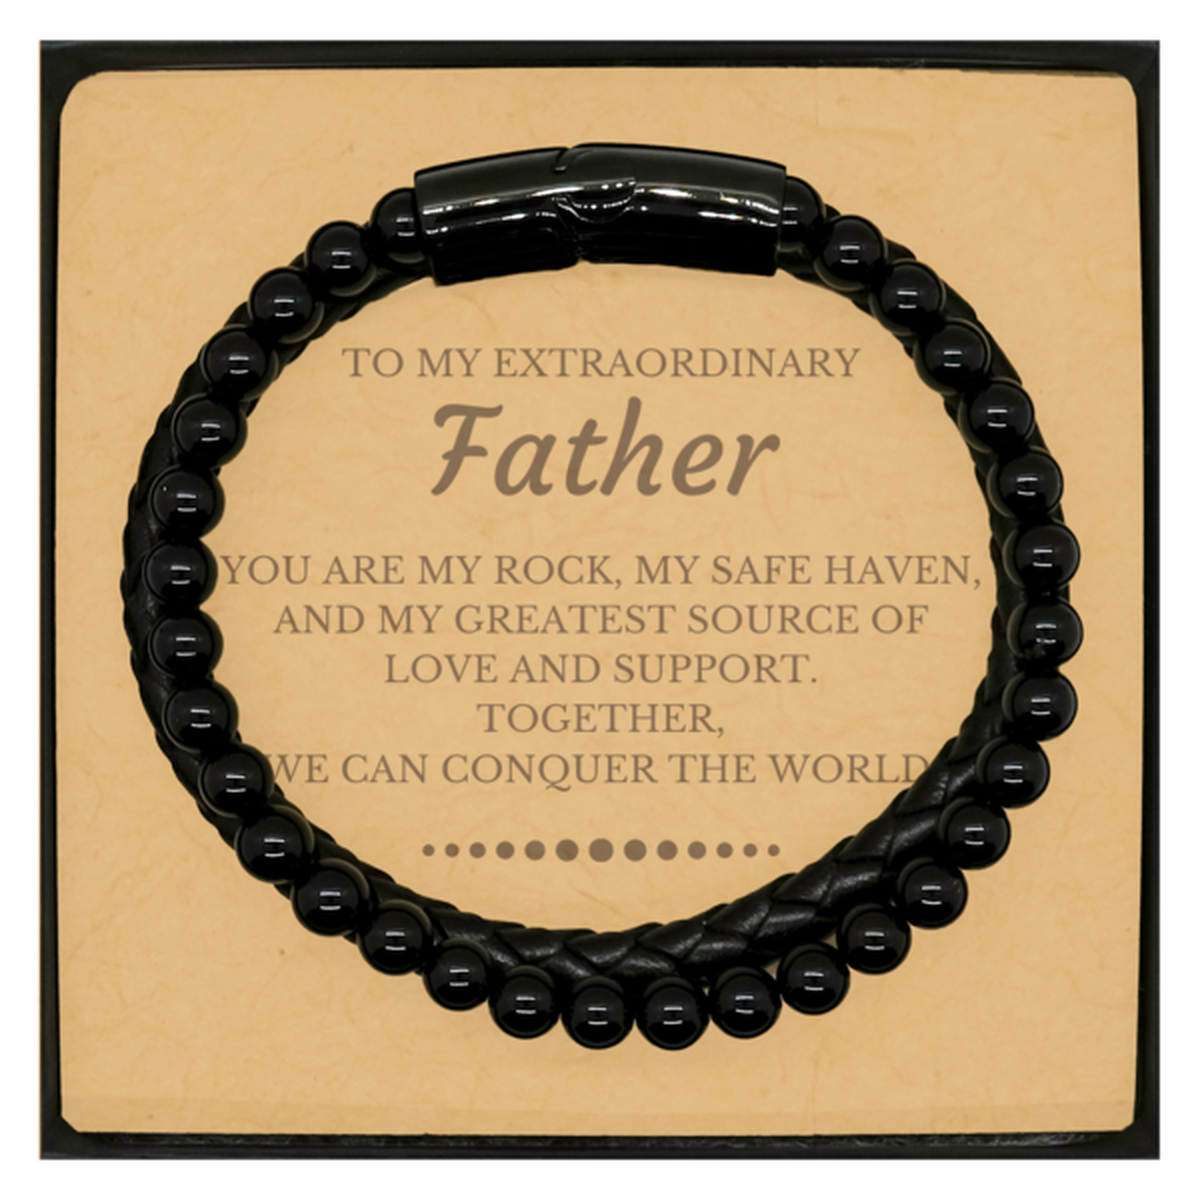 To My Extraordinary Father Gifts, Together, we can conquer the world, Birthday Christmas Stone Leather Bracelets For Father, Christmas Gifts For Father